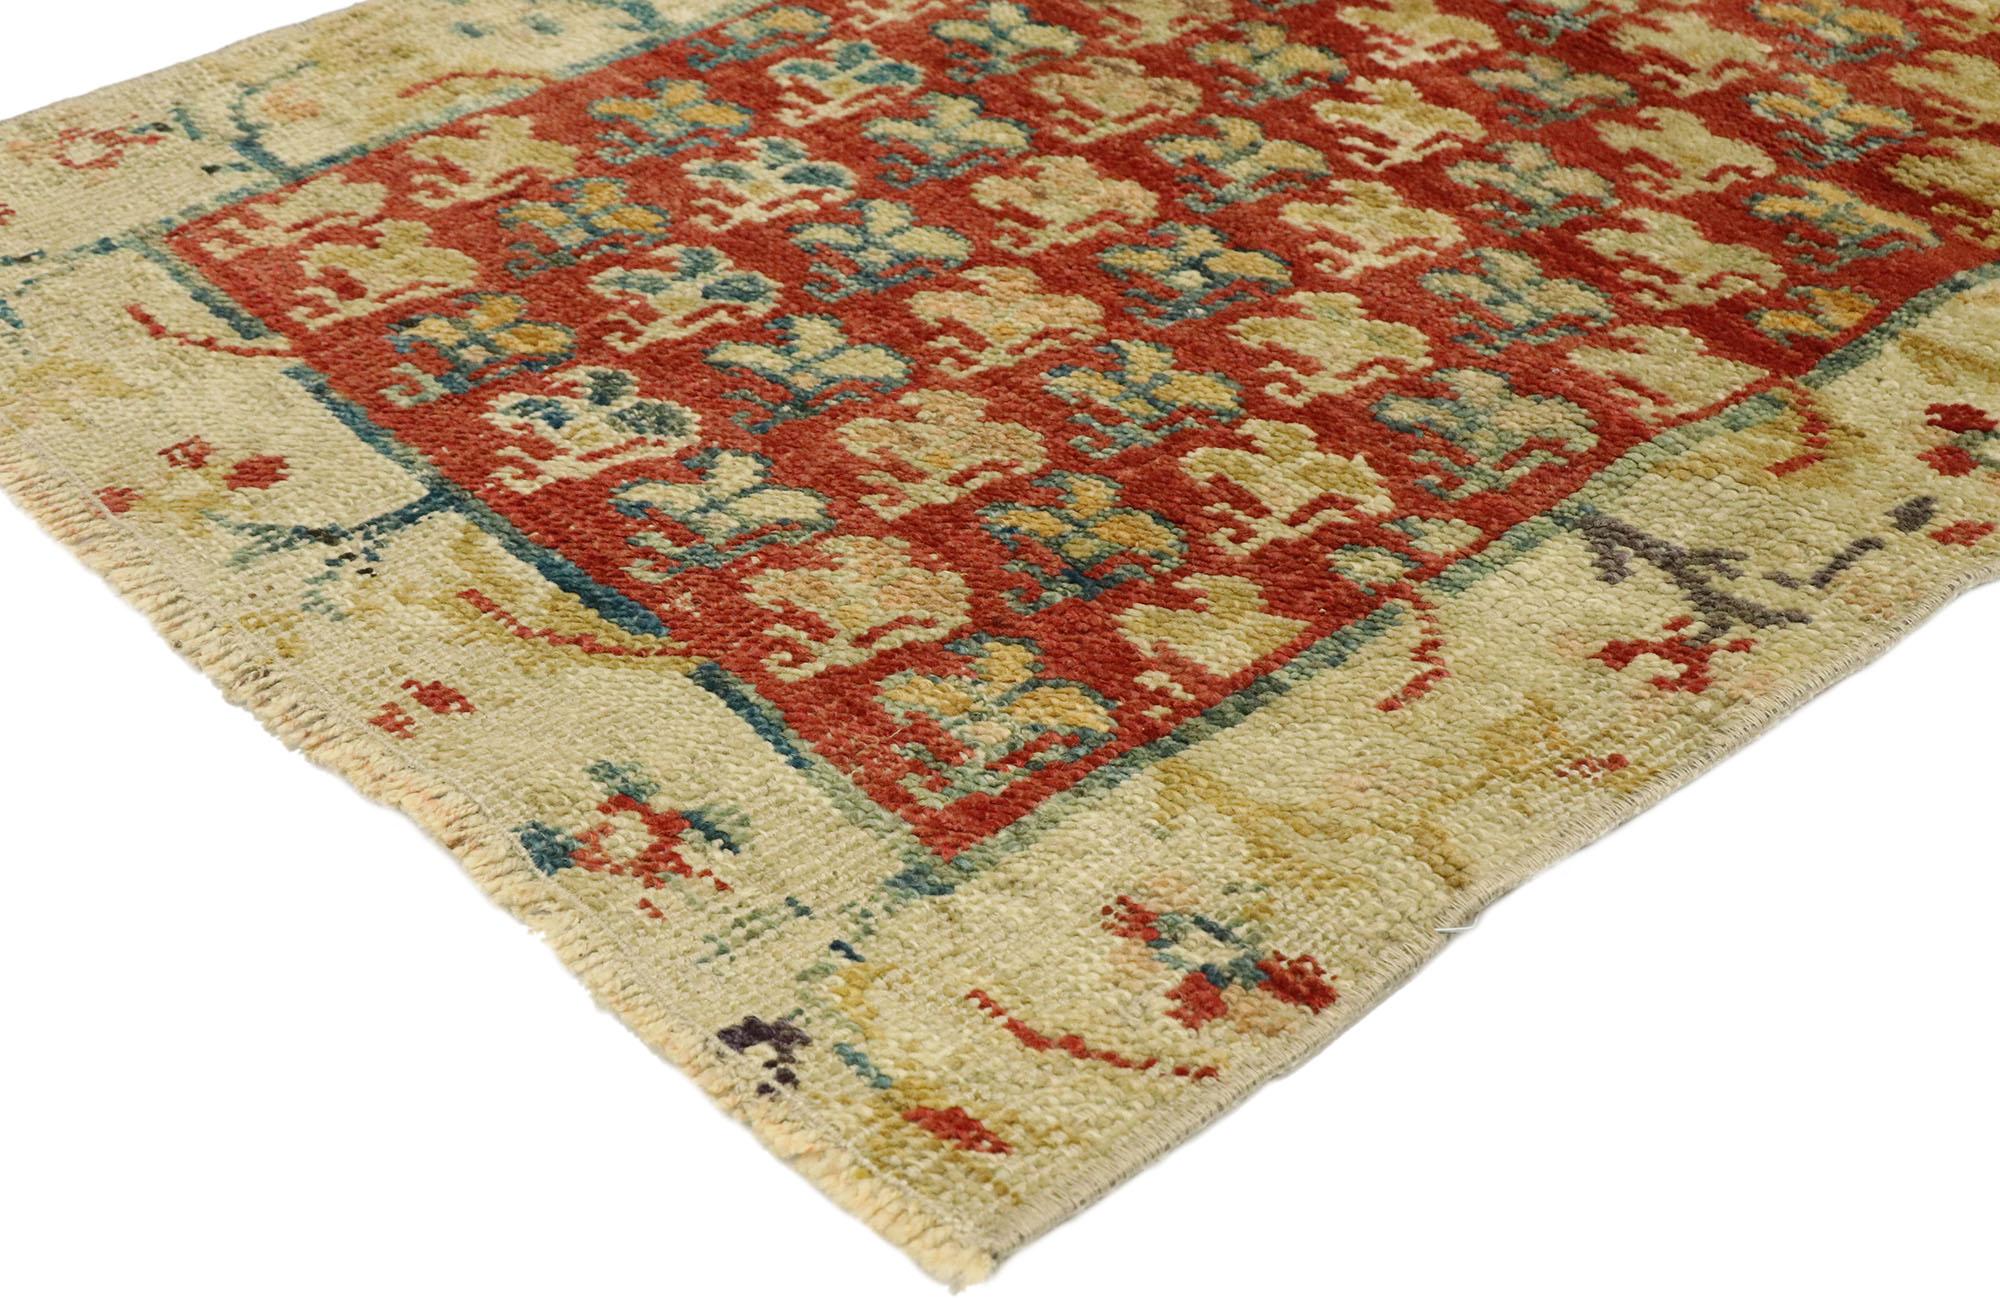 52096, distressed vintage Turkish Oushak rug with Modern Rustic Northwestern style. Down-to-earth vibes and rustic sensibility meet Pacific Northwest style in this hand knotted wool distressed vintage Turkish Oushak rug. The abrashed field features